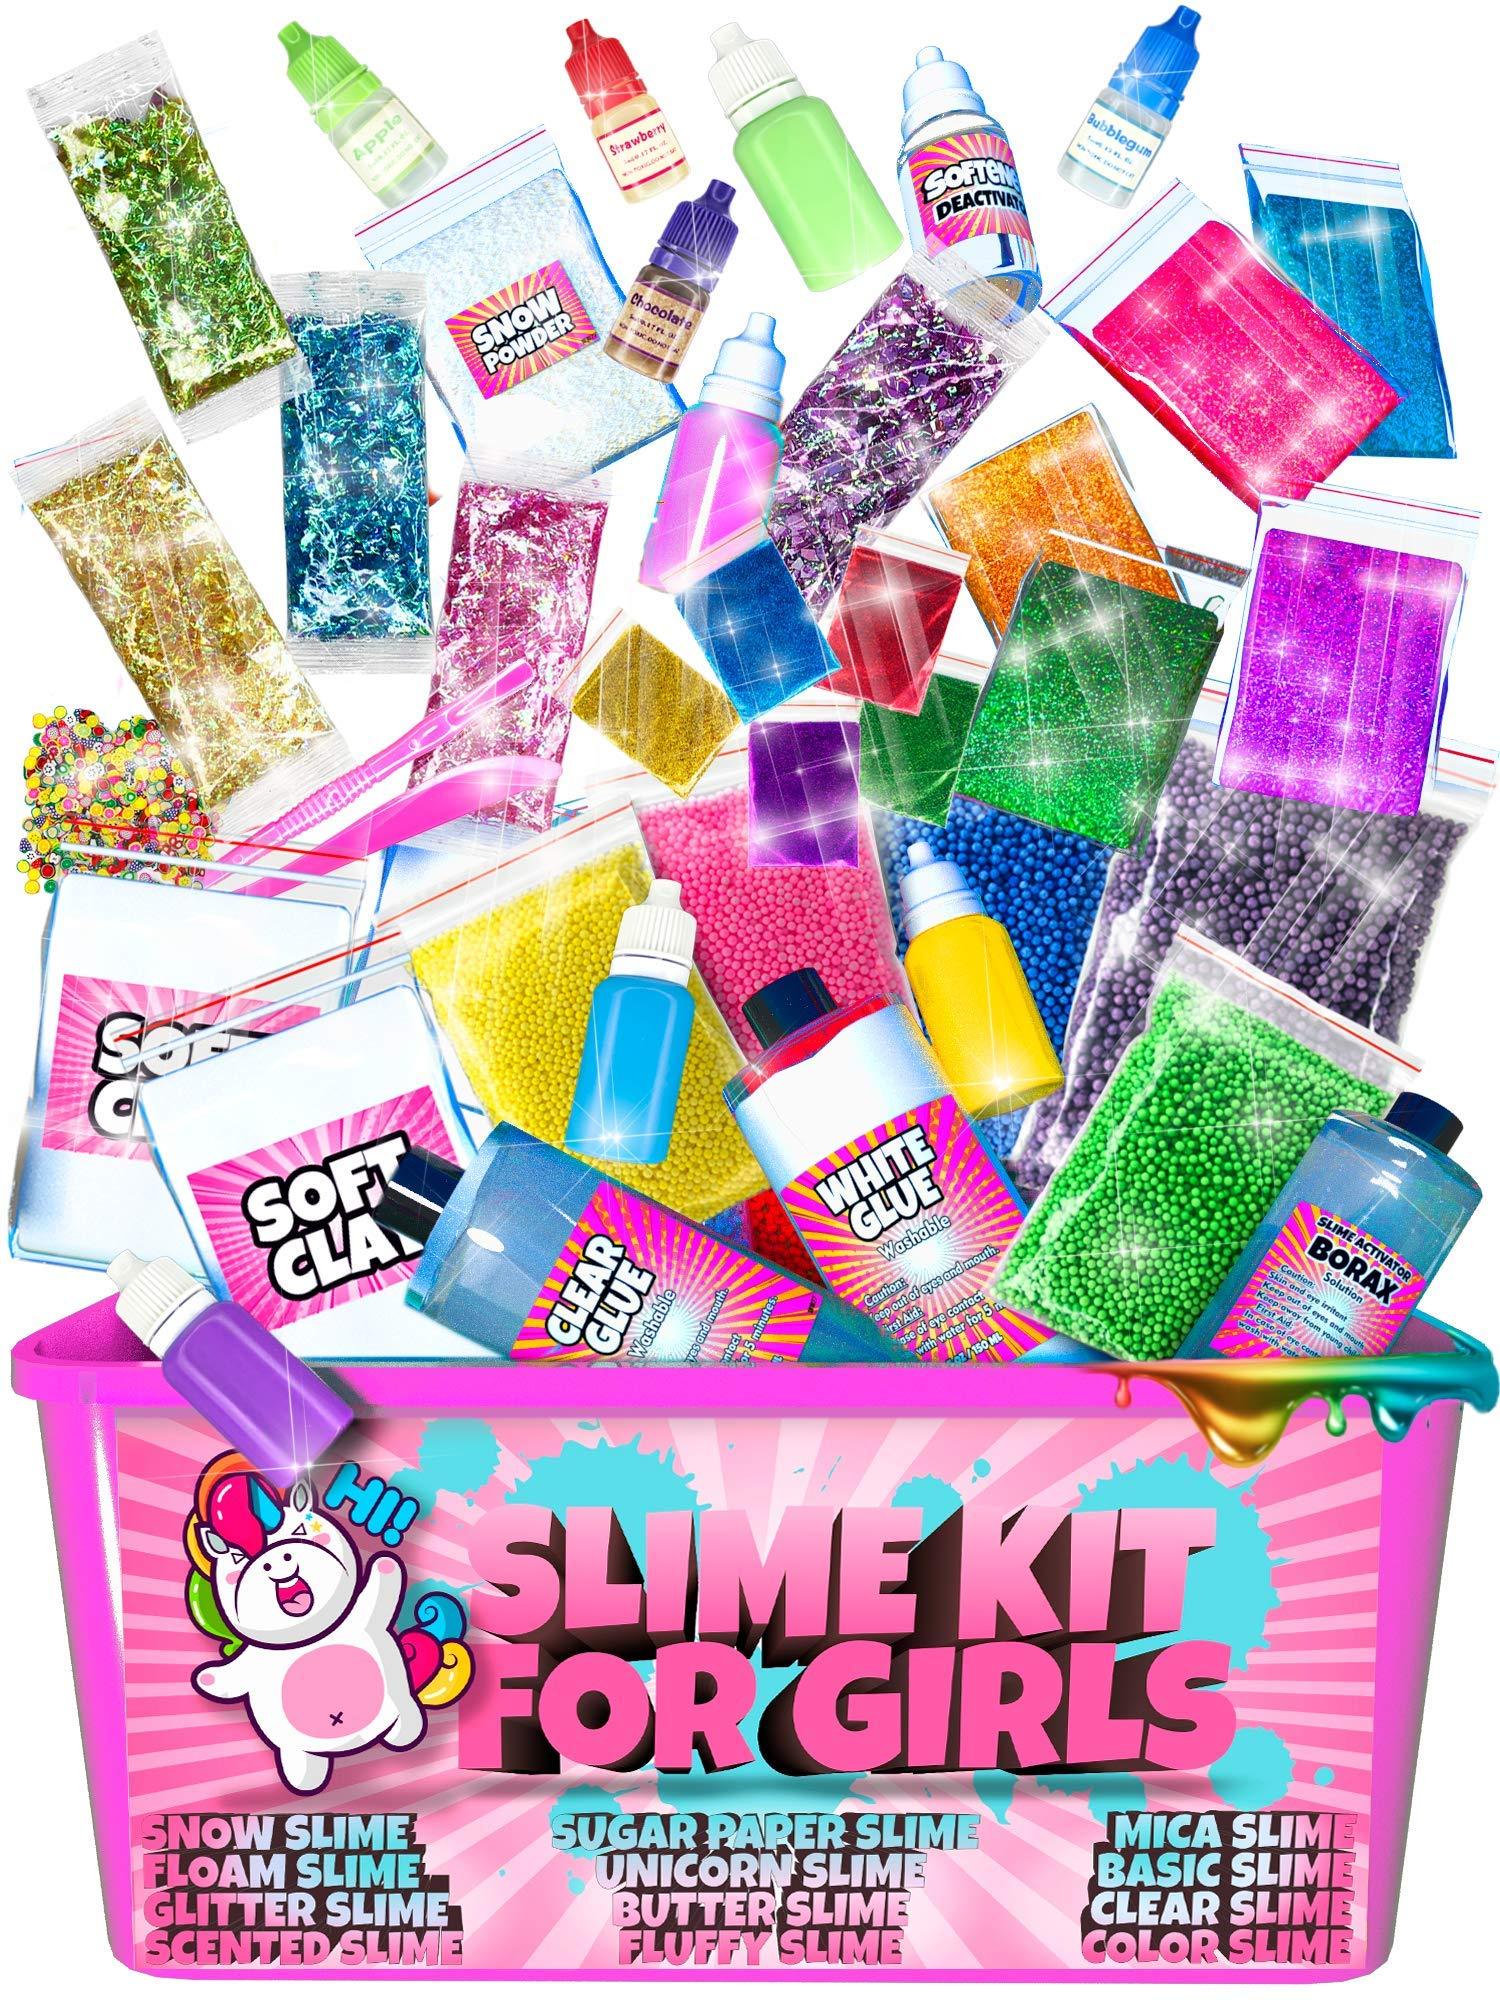 Slime Kit for Girls - 2 in 1 - DIY Slime Making Kit PLUS Slime Supplies Kit  - All-Inclusive [57 Pieces Set] DIY Slime Kit With Instant Snow, Clear  Glue, Foam Balls